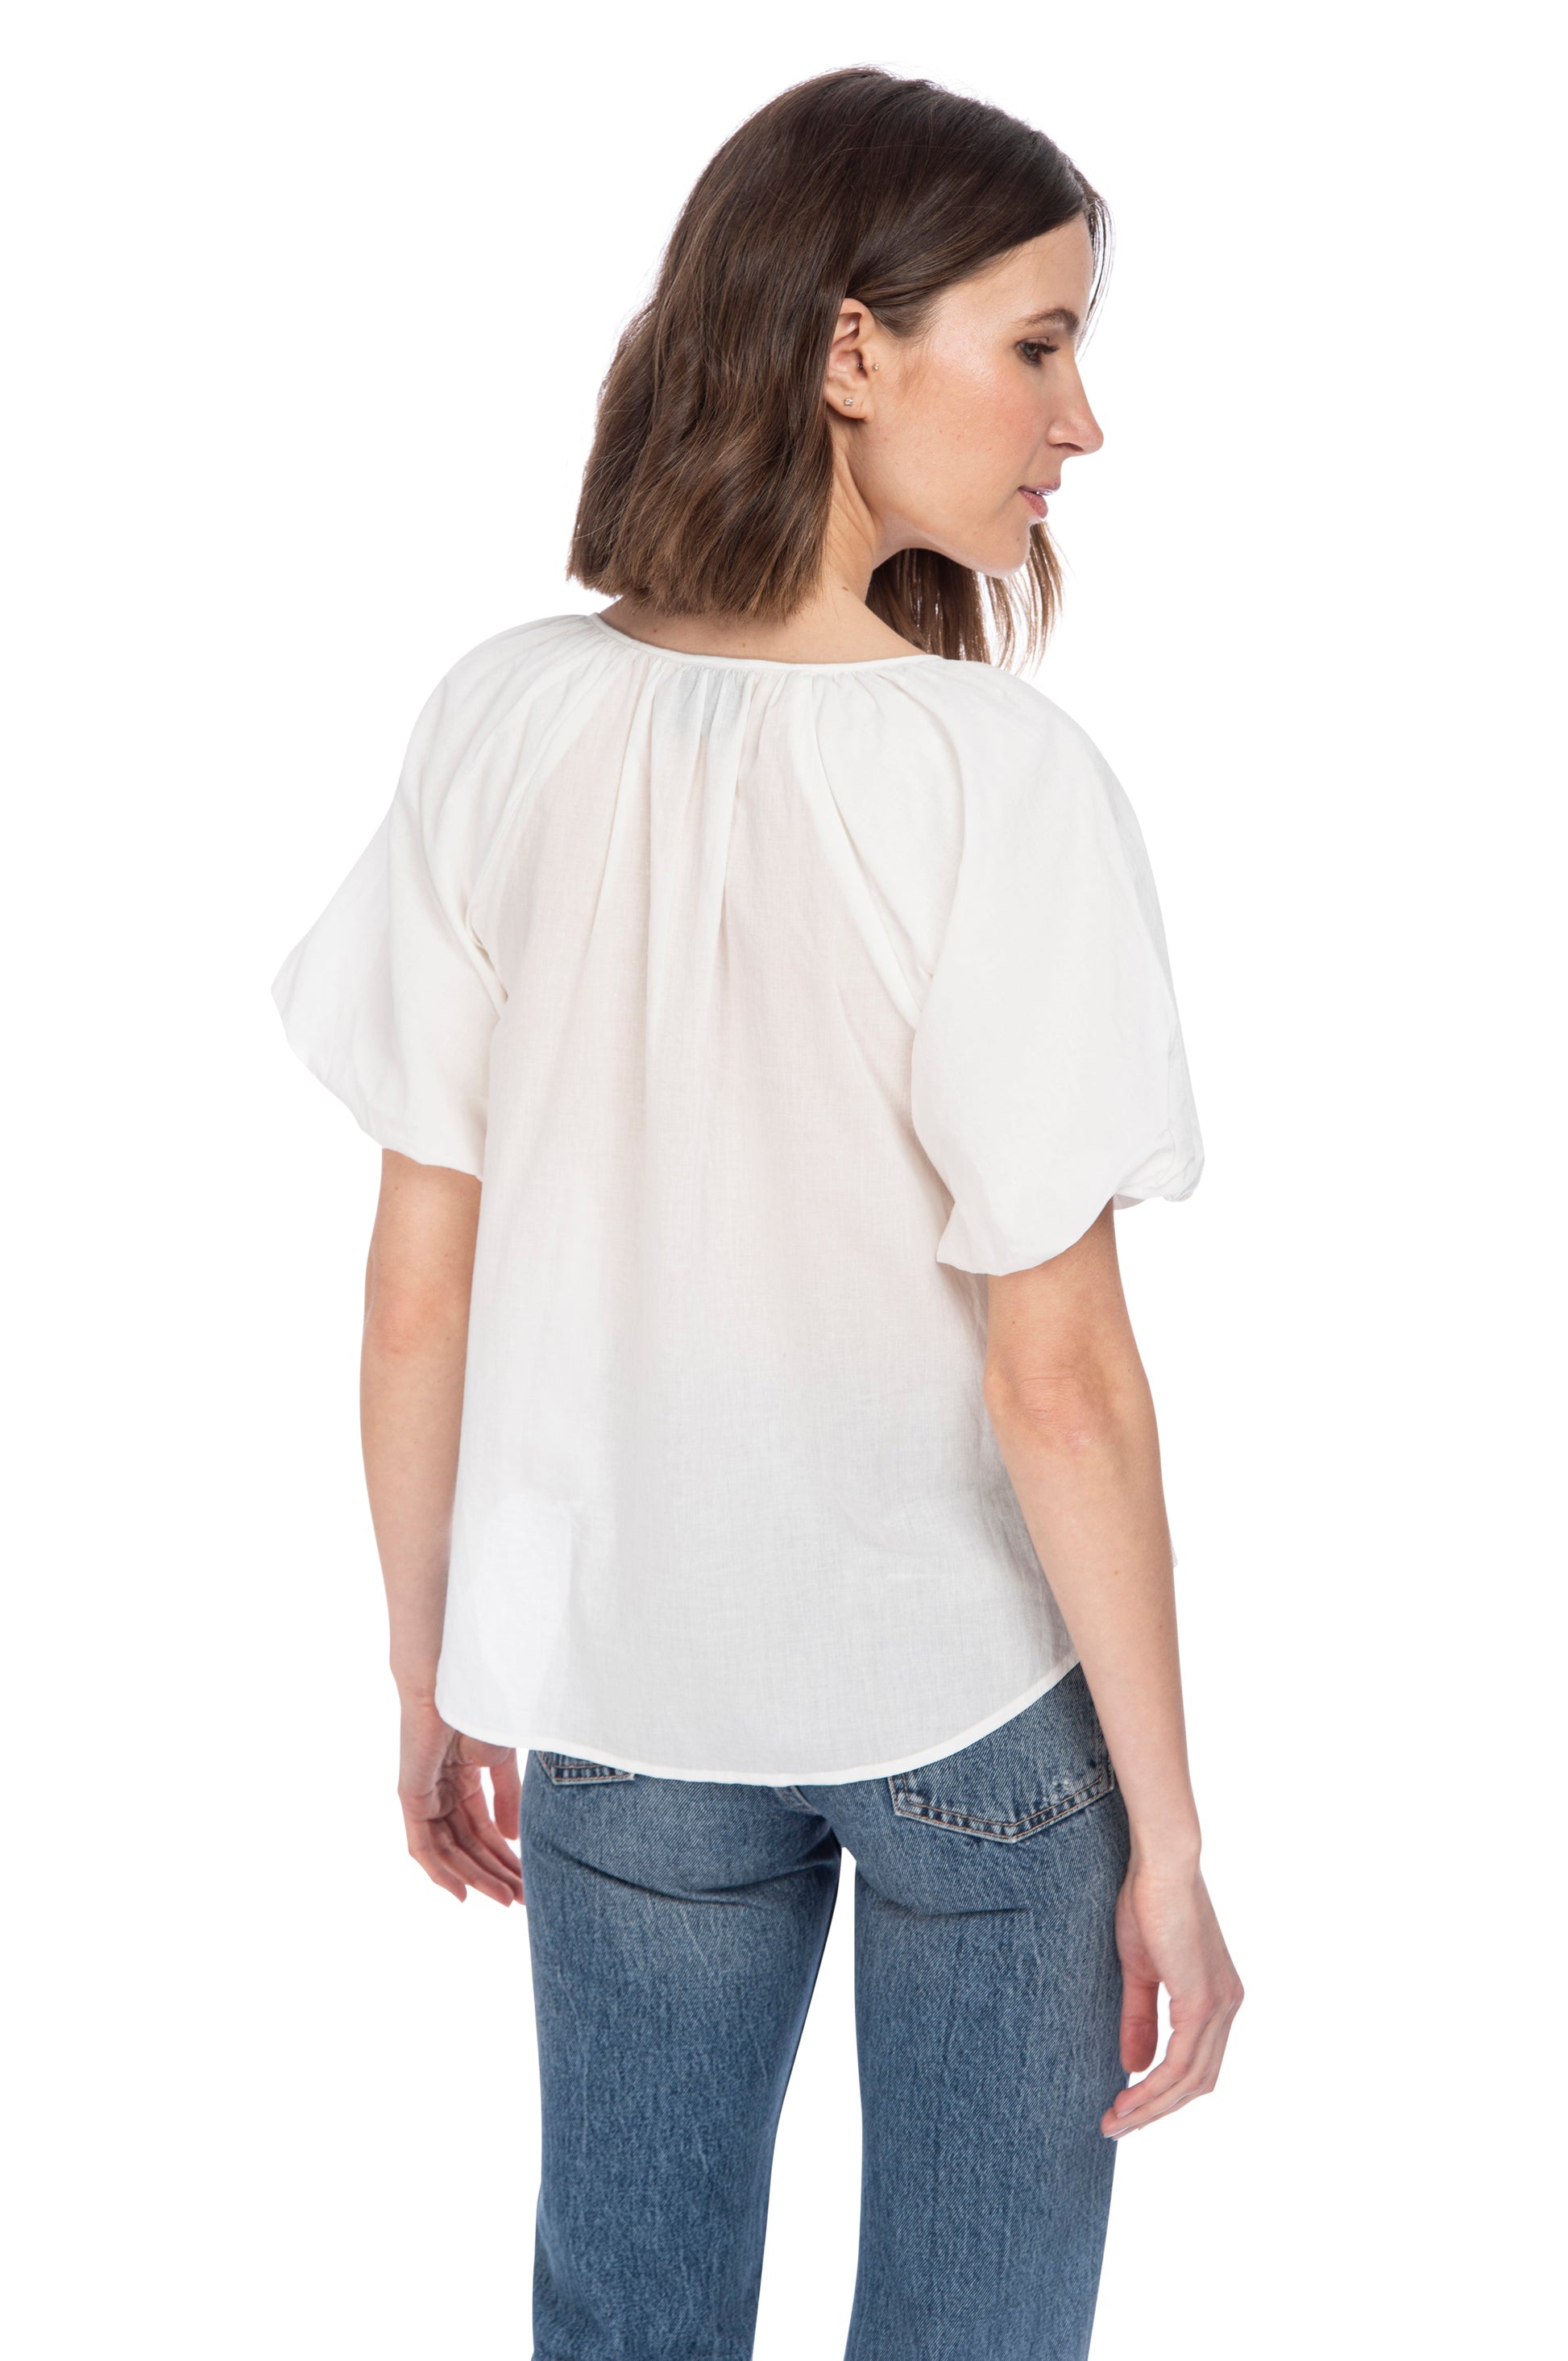 A woman seen from behind, wearing a casual cream-colored B Collection by Bobeau Bubble Sleeve Cotton Top and blue jeans, looking to the side.